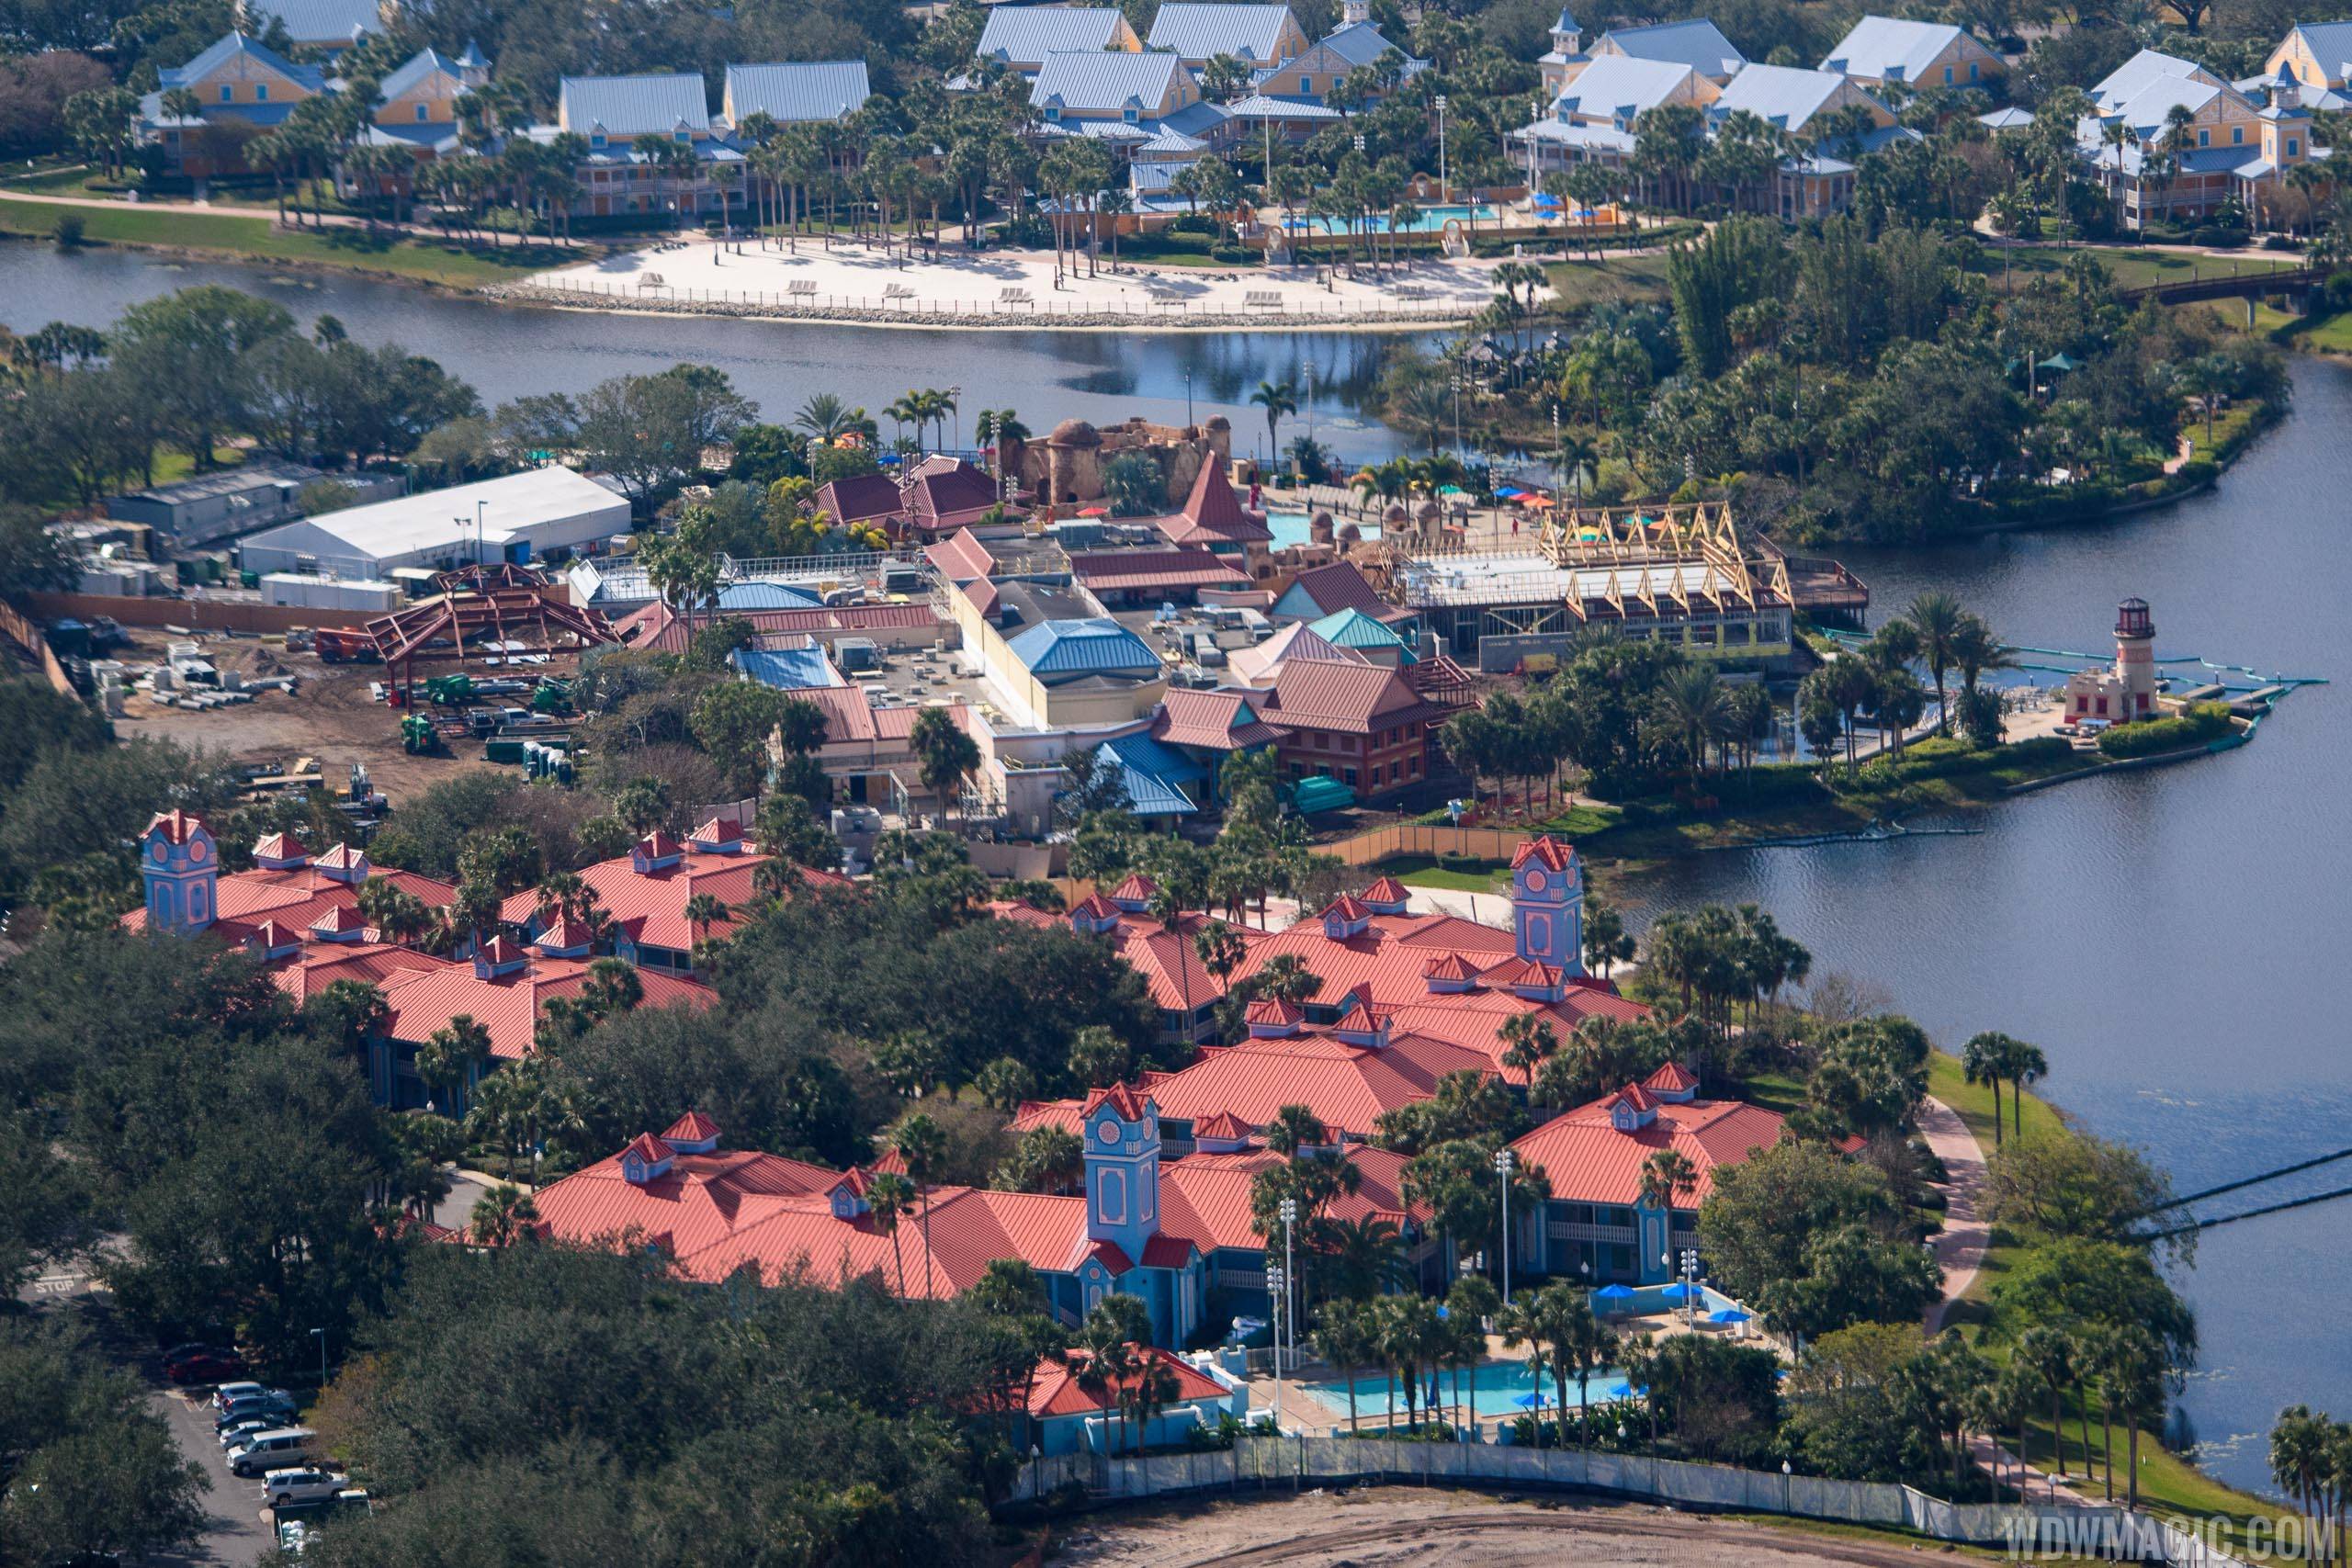 PHOTOS - Latest aerial views of the Caribbean Beach Resort Old Port Royale expansion